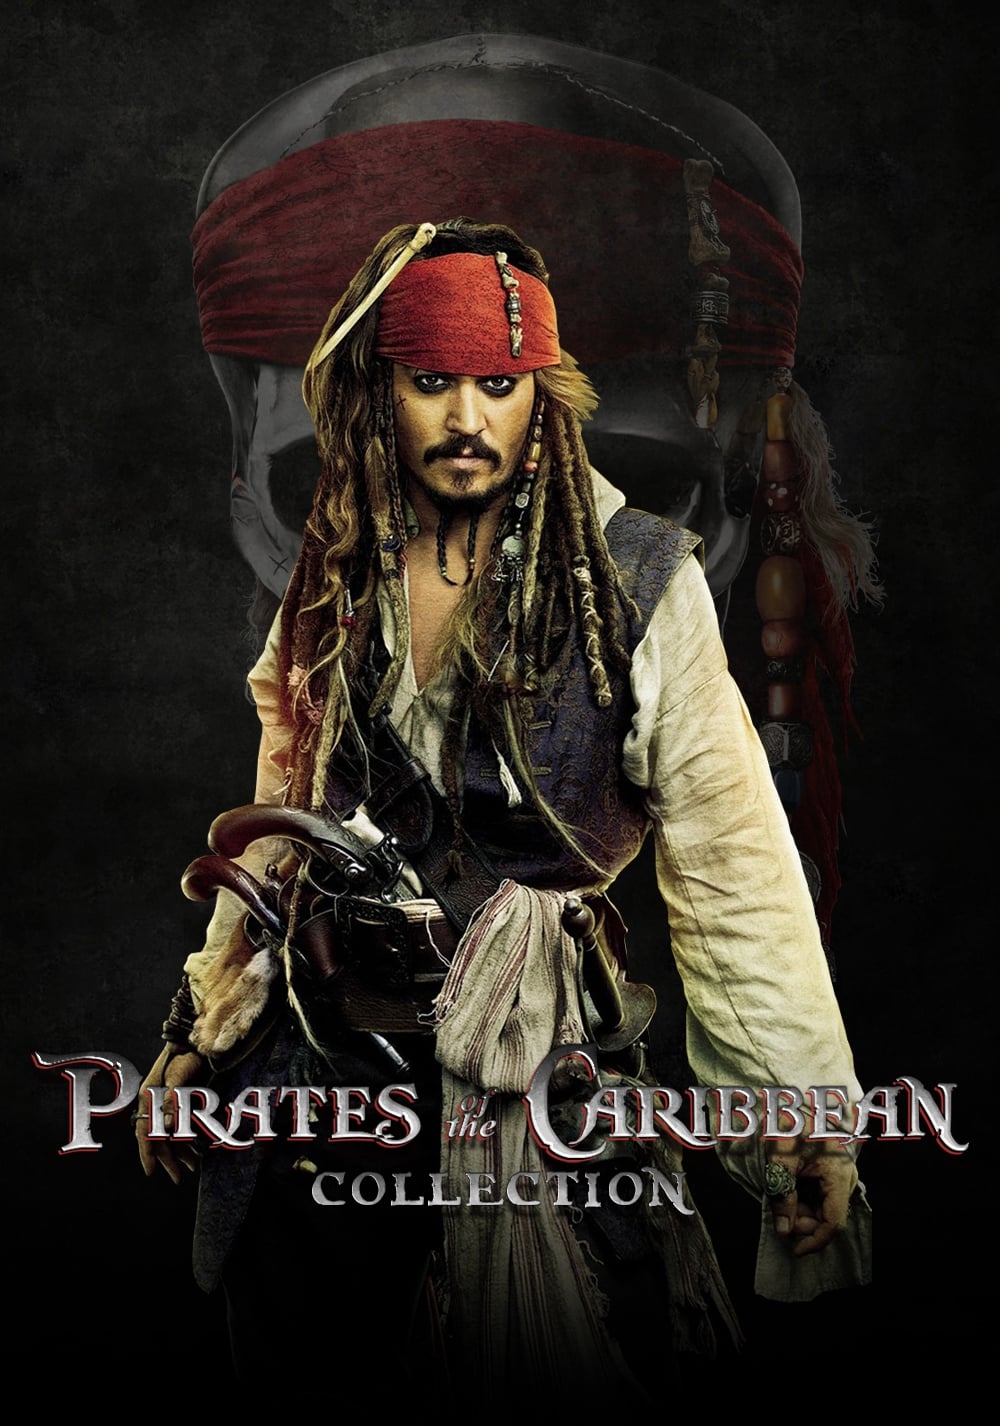 Pirates of the Caribbean – MP4 Movie (Complete Collection Part 1-5)